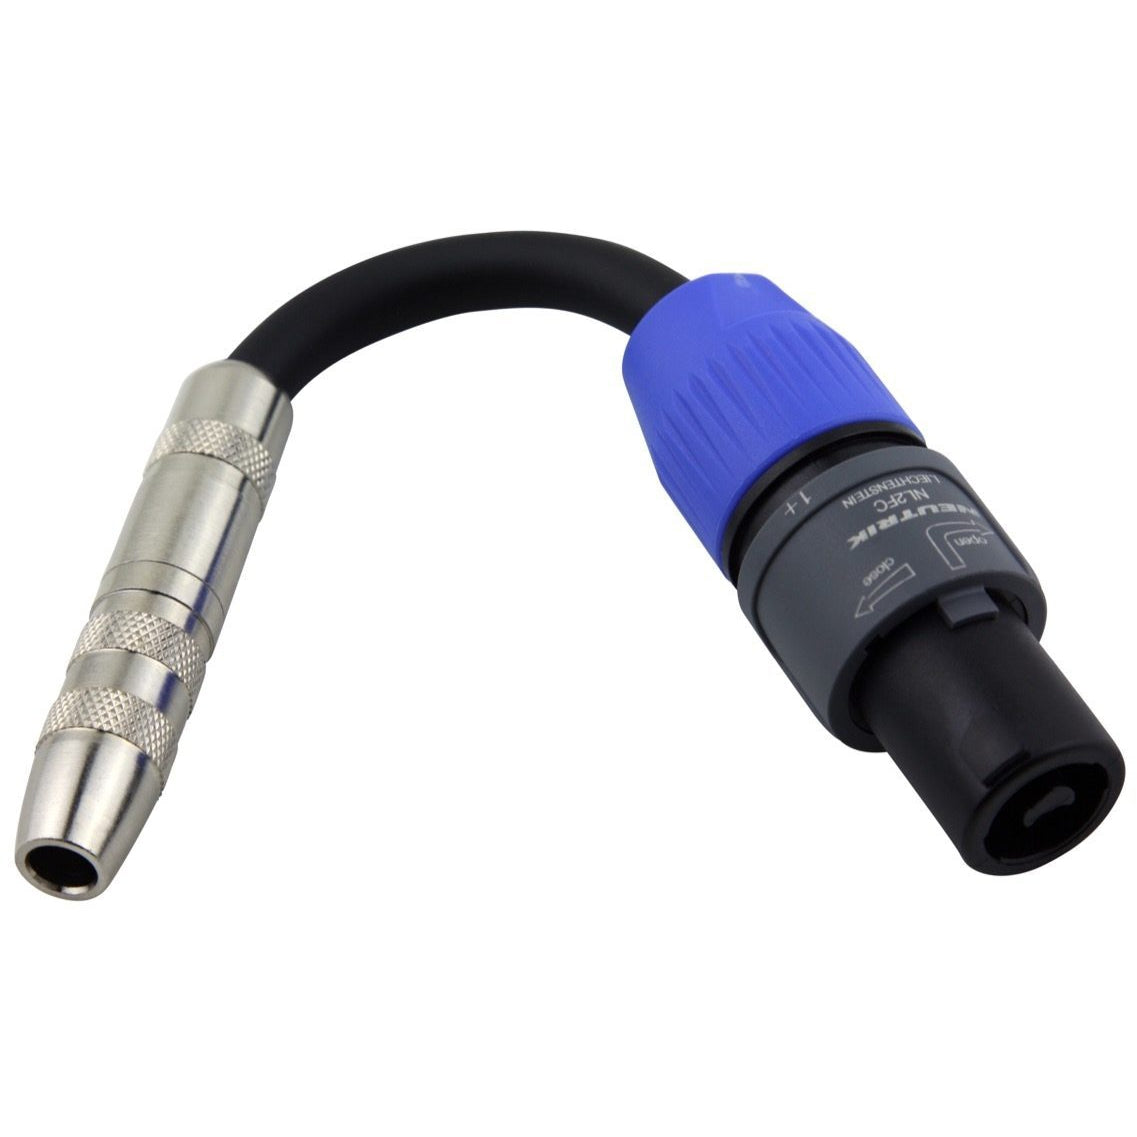 Pig Hog 1/4 Inch (Female) to Speakon (Male) Adapter Cable